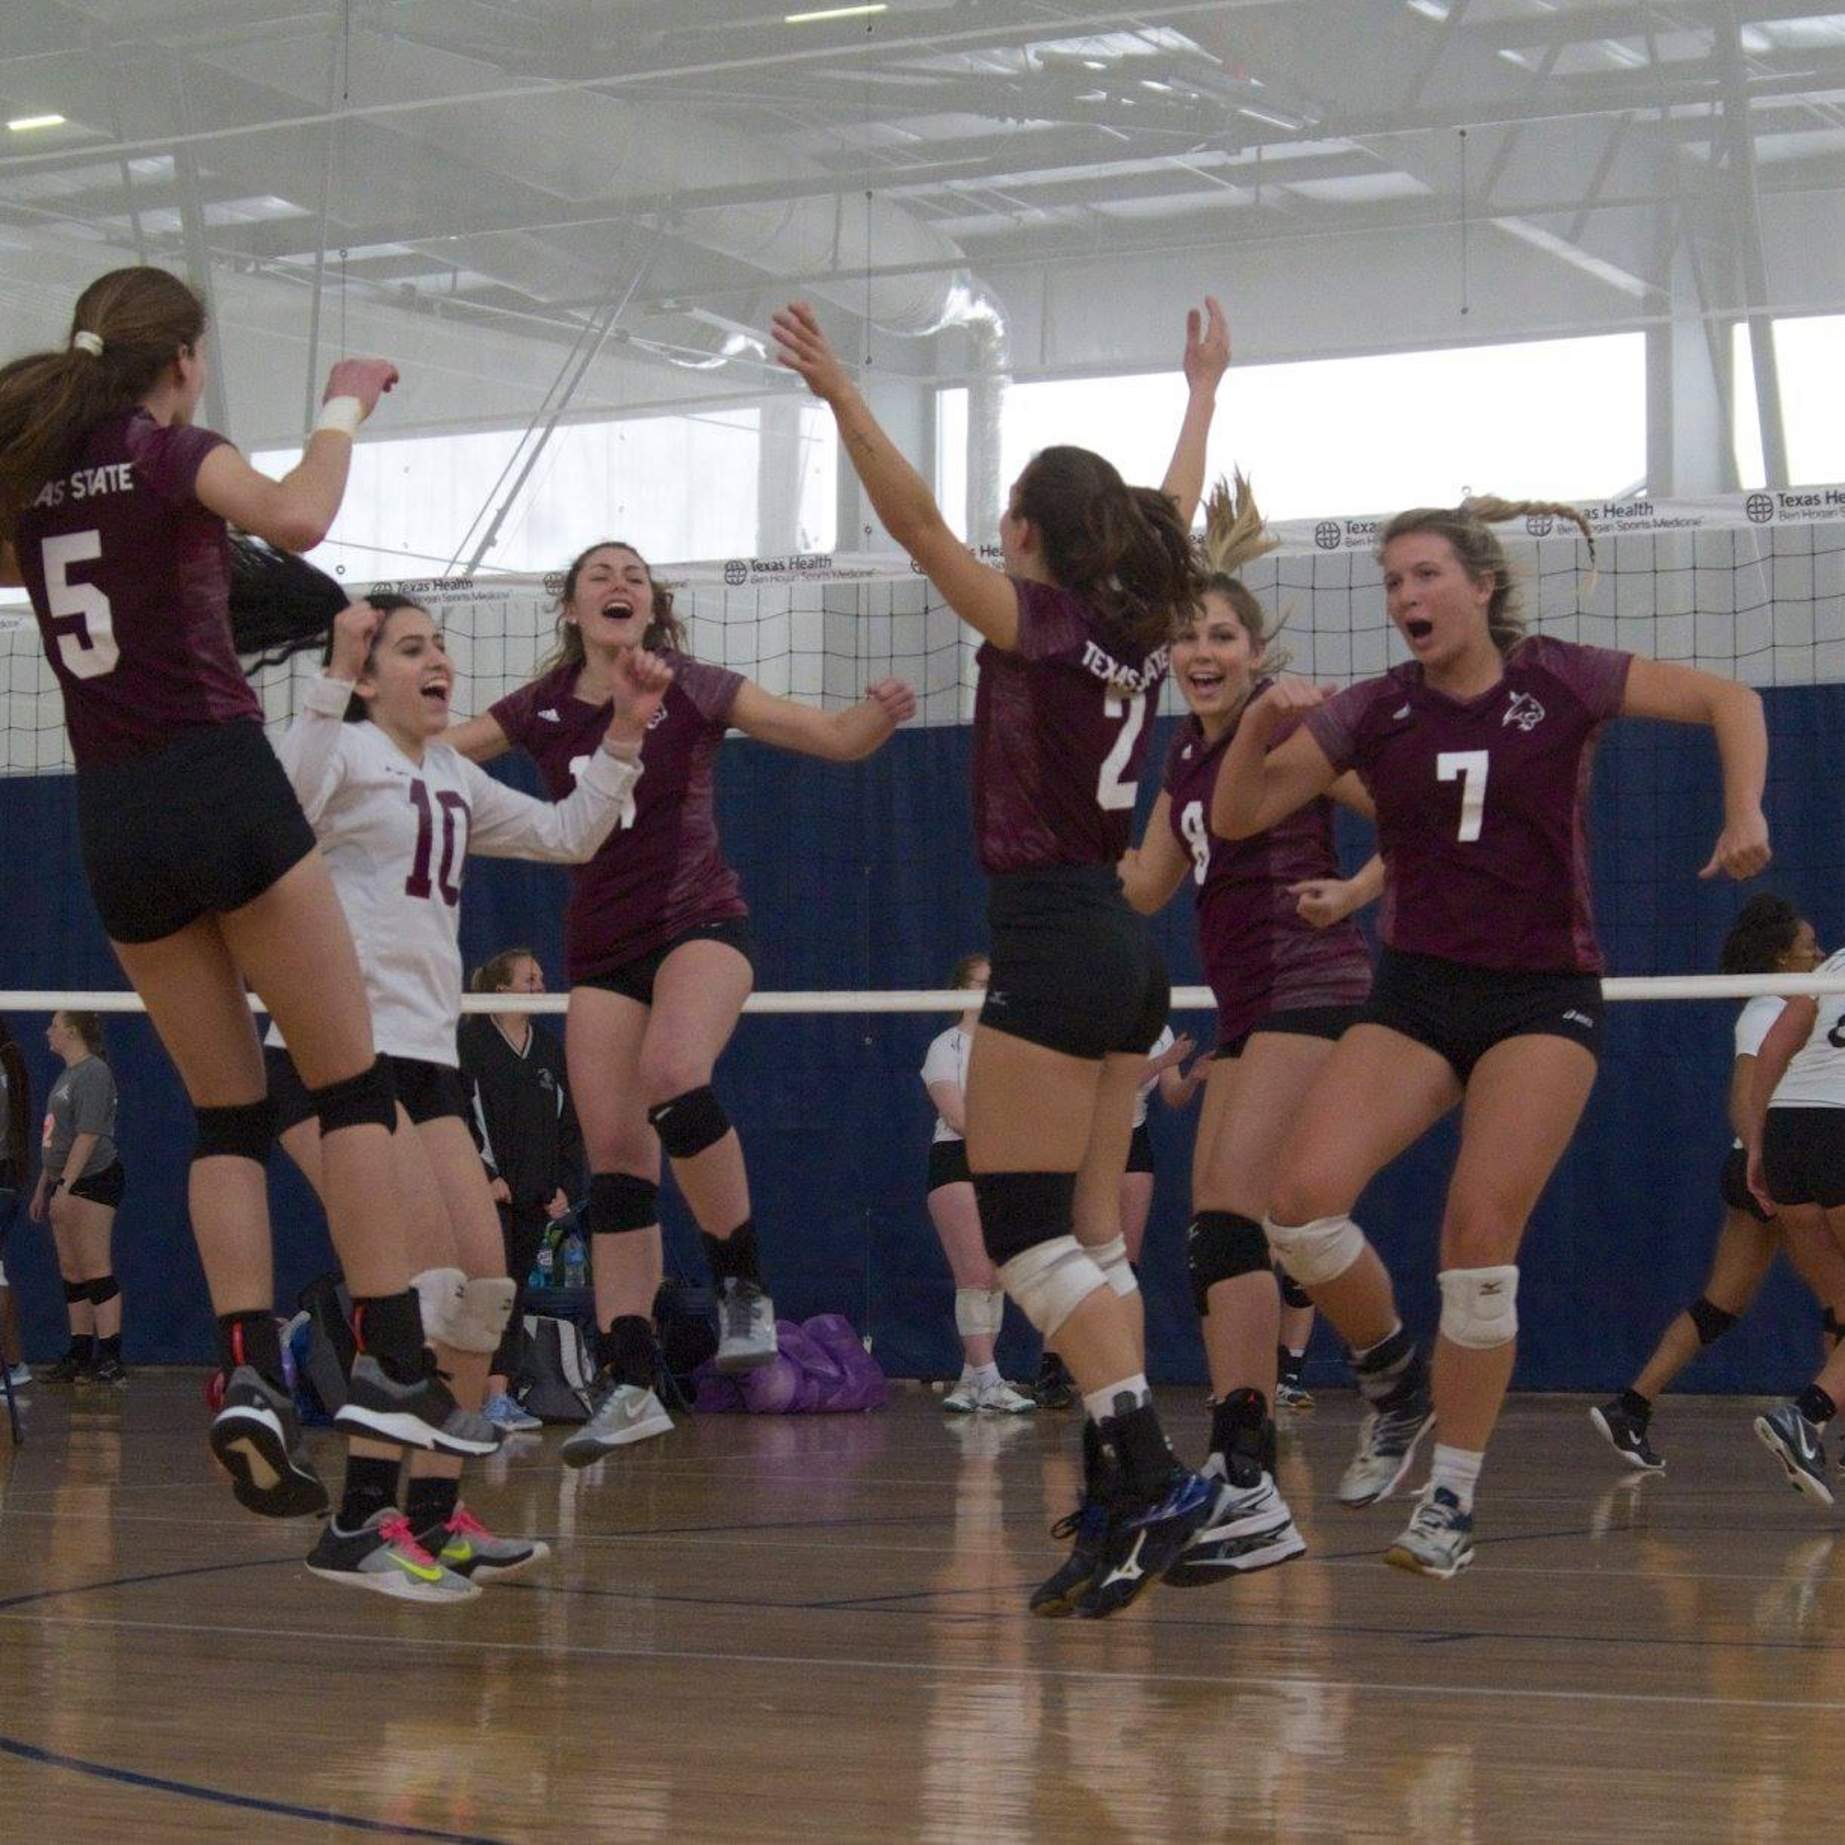 Women's Volleyball club celebrates on court